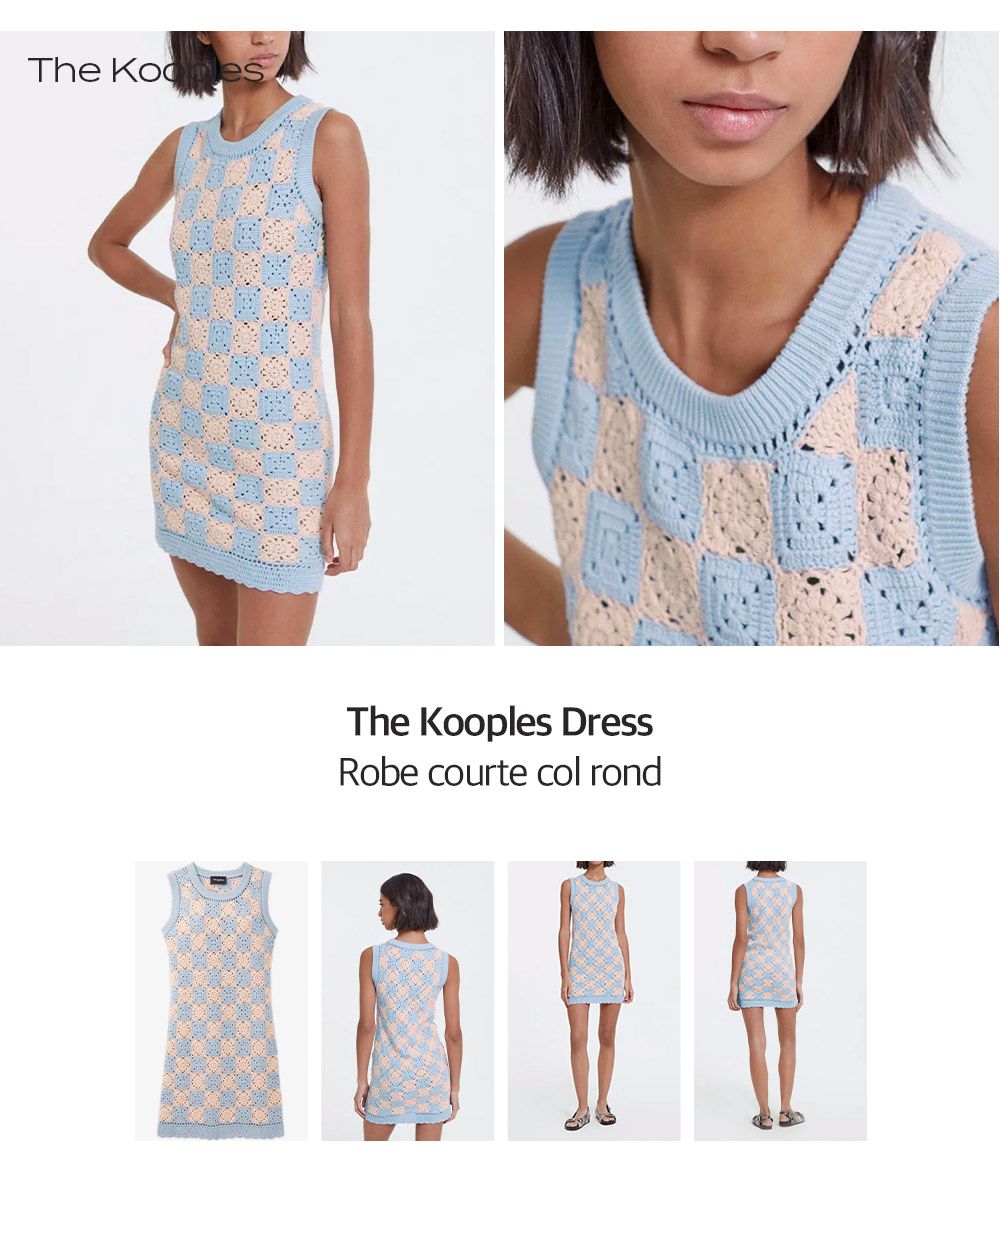 The kooples Dress Robe courte col rond